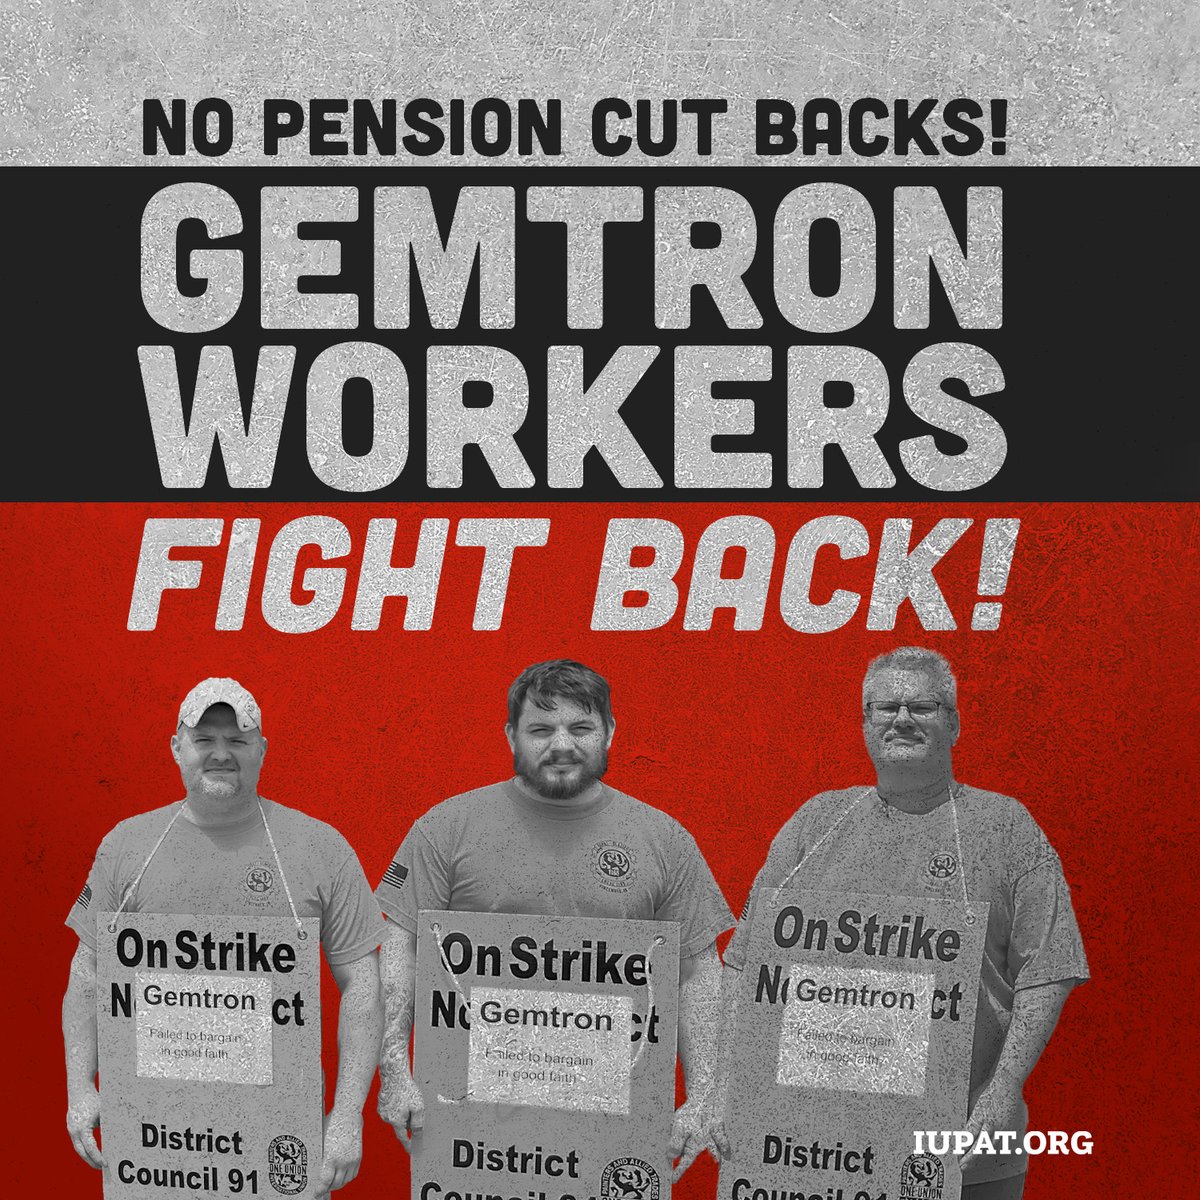 Our members who work at Gemtron, a glass manufacturer in Indiana, are on an unfair labor practice strike because the company refuses to bargain in good faith and wants to eliminate hard-earned pensions for their workers. Join us in fighting back! No pension cut backs!